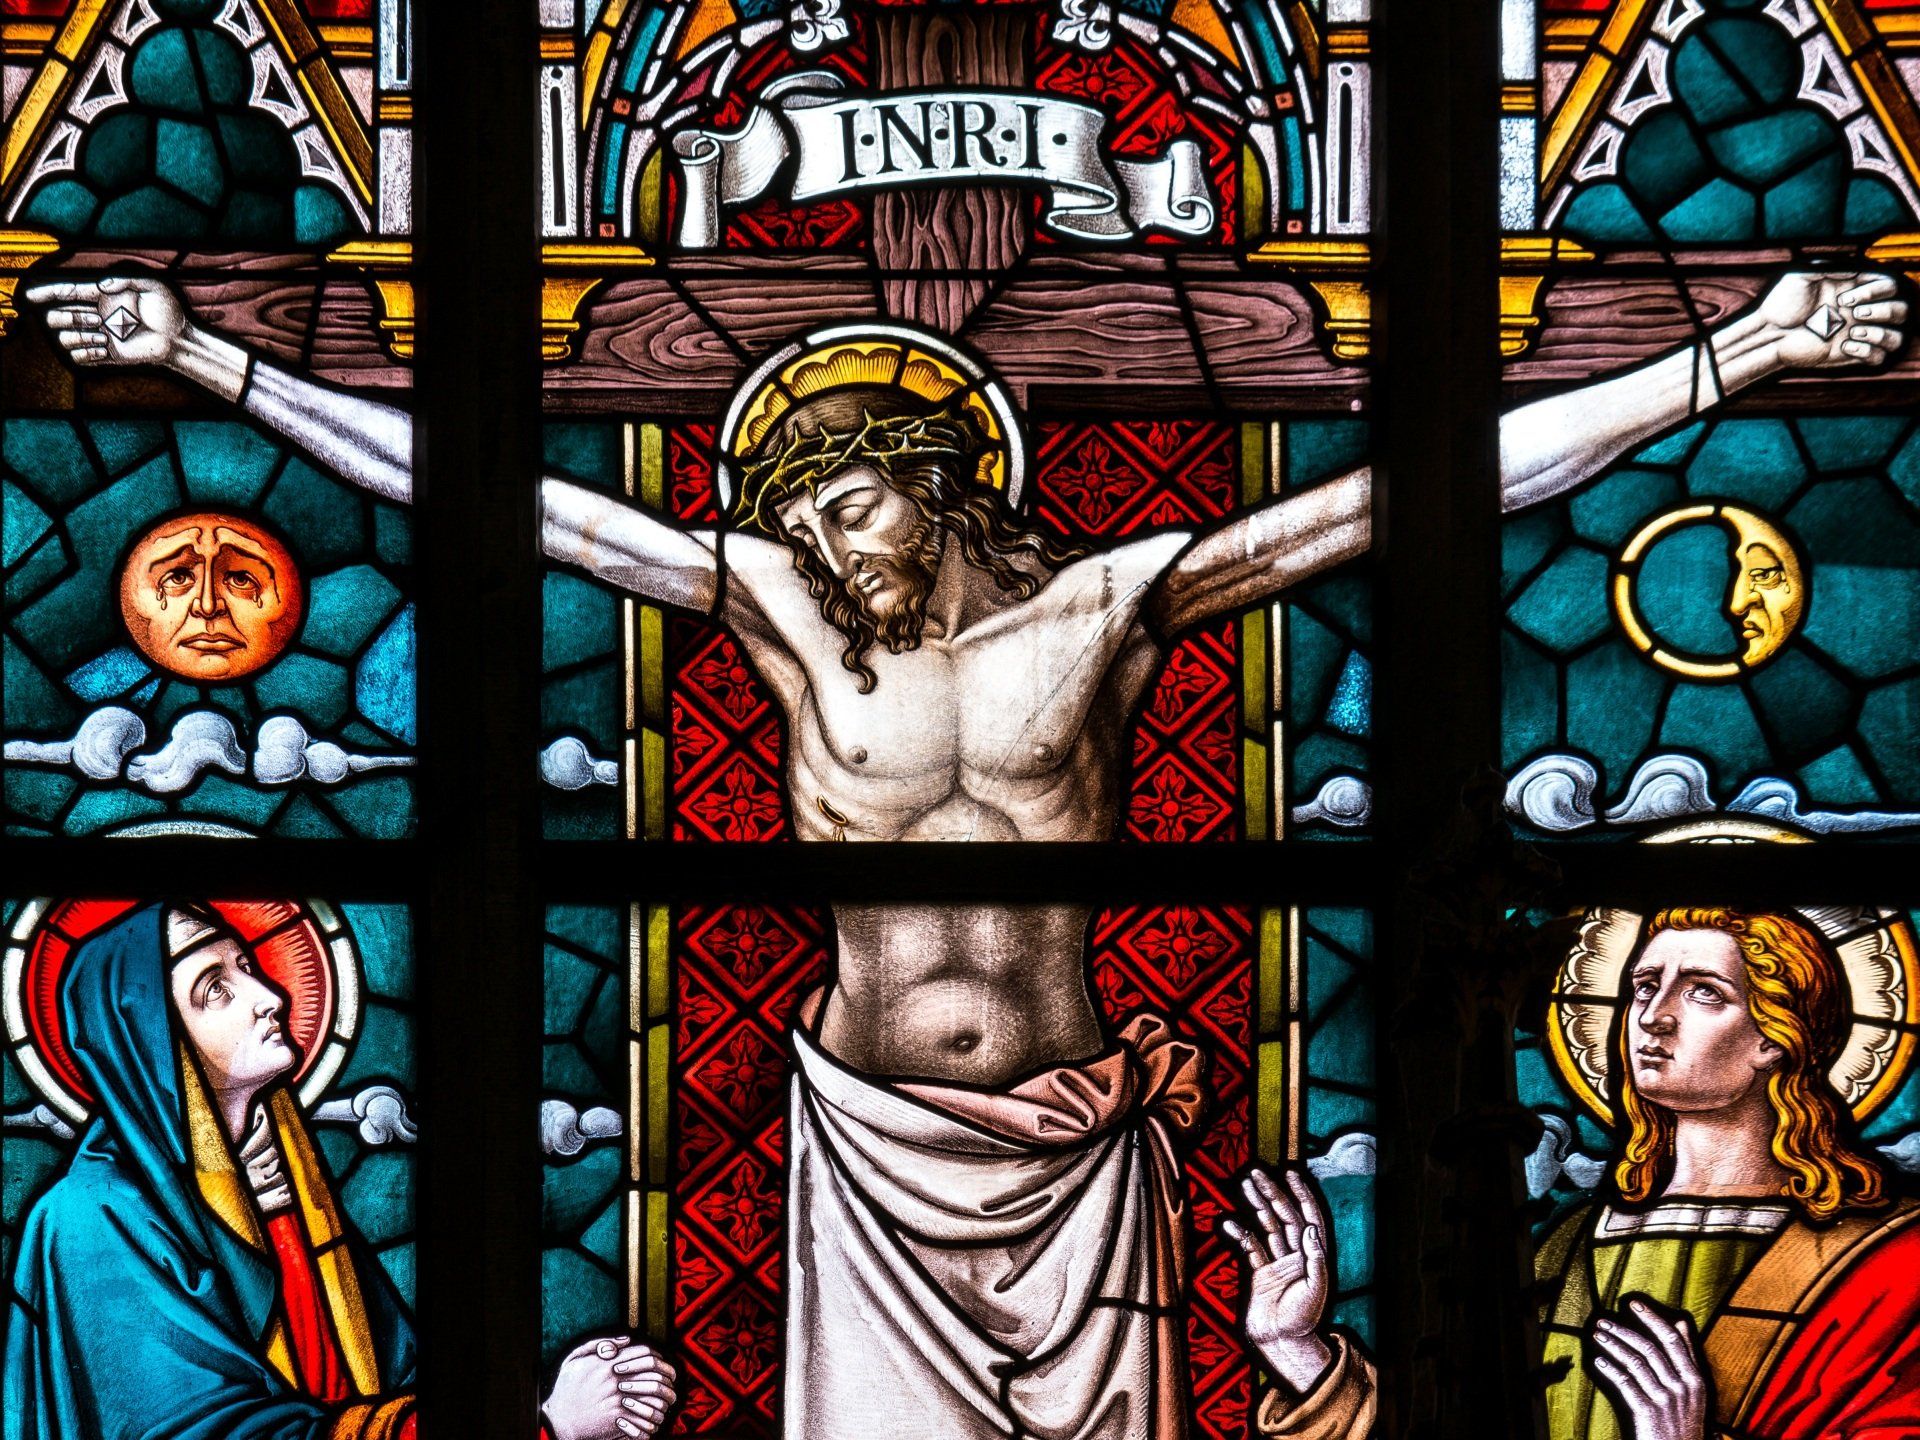 A stained glass window shows jesus on the cross